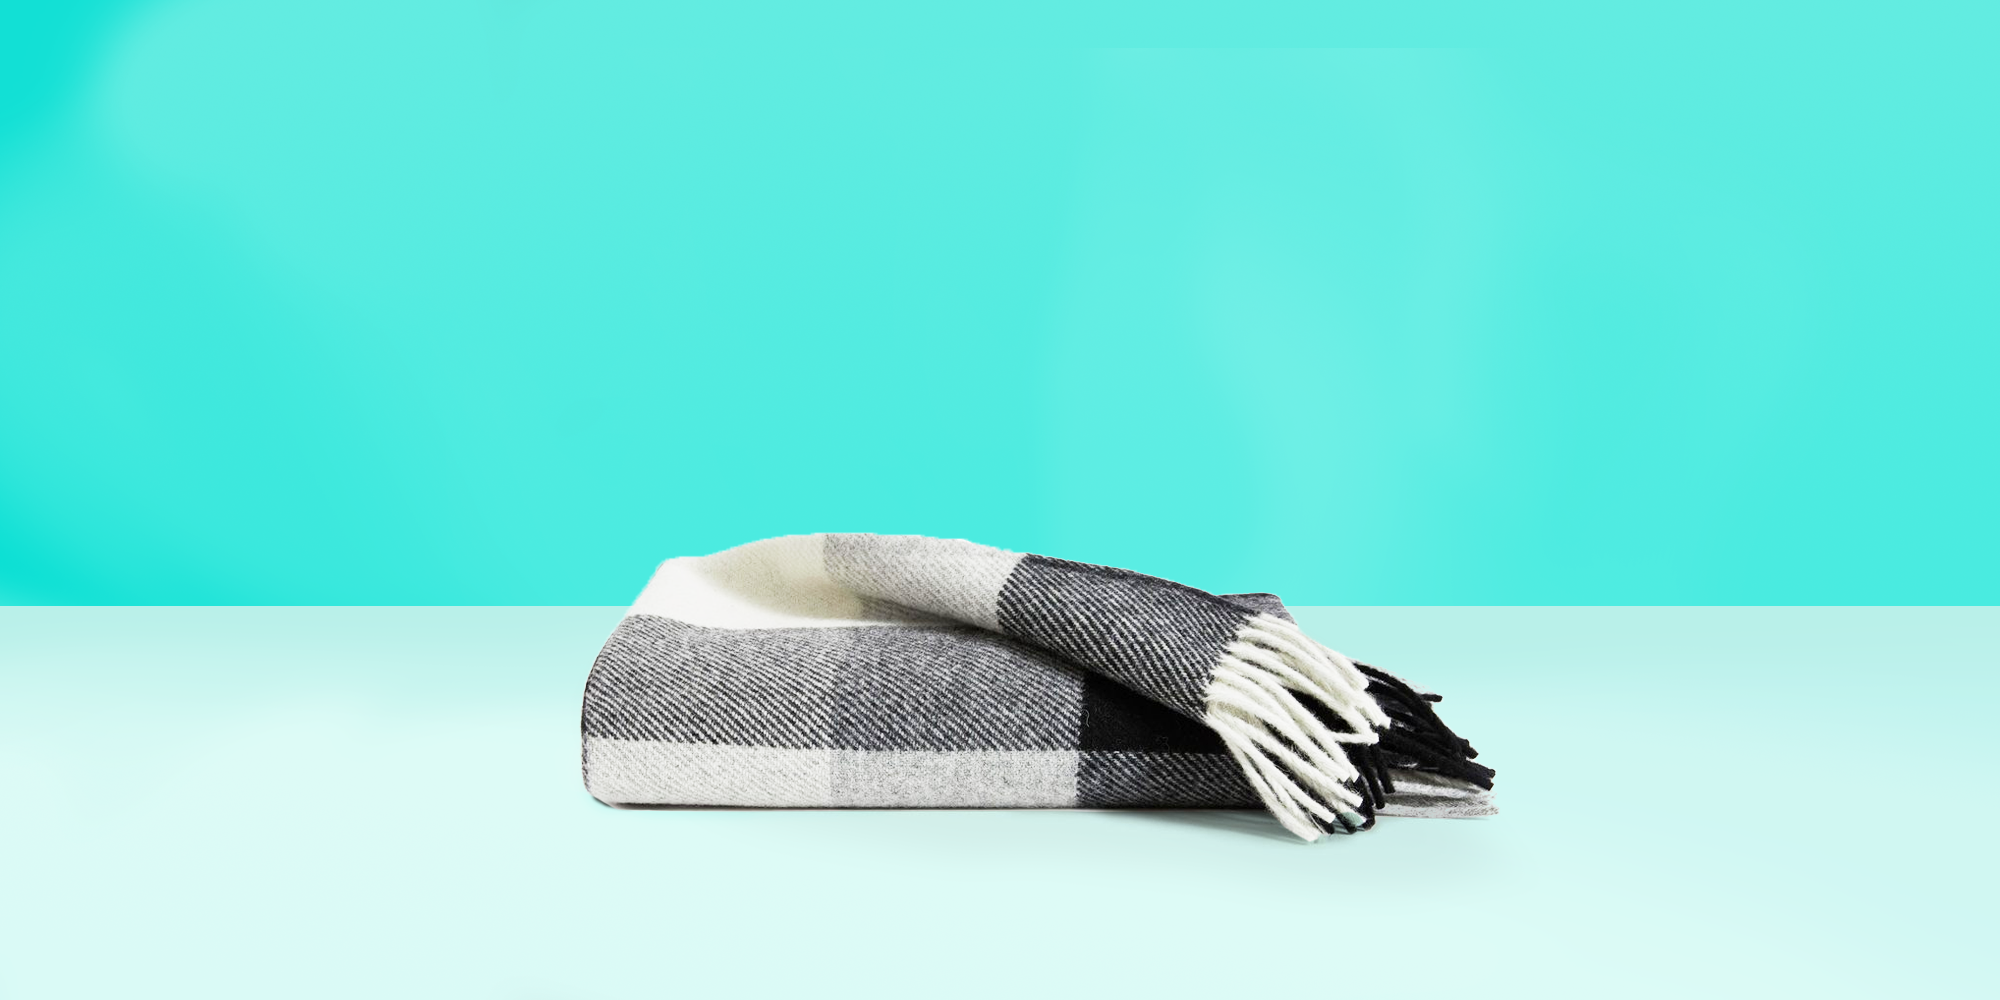 9 Best Blankets Warmest Throws And Plush Blankets For Winter